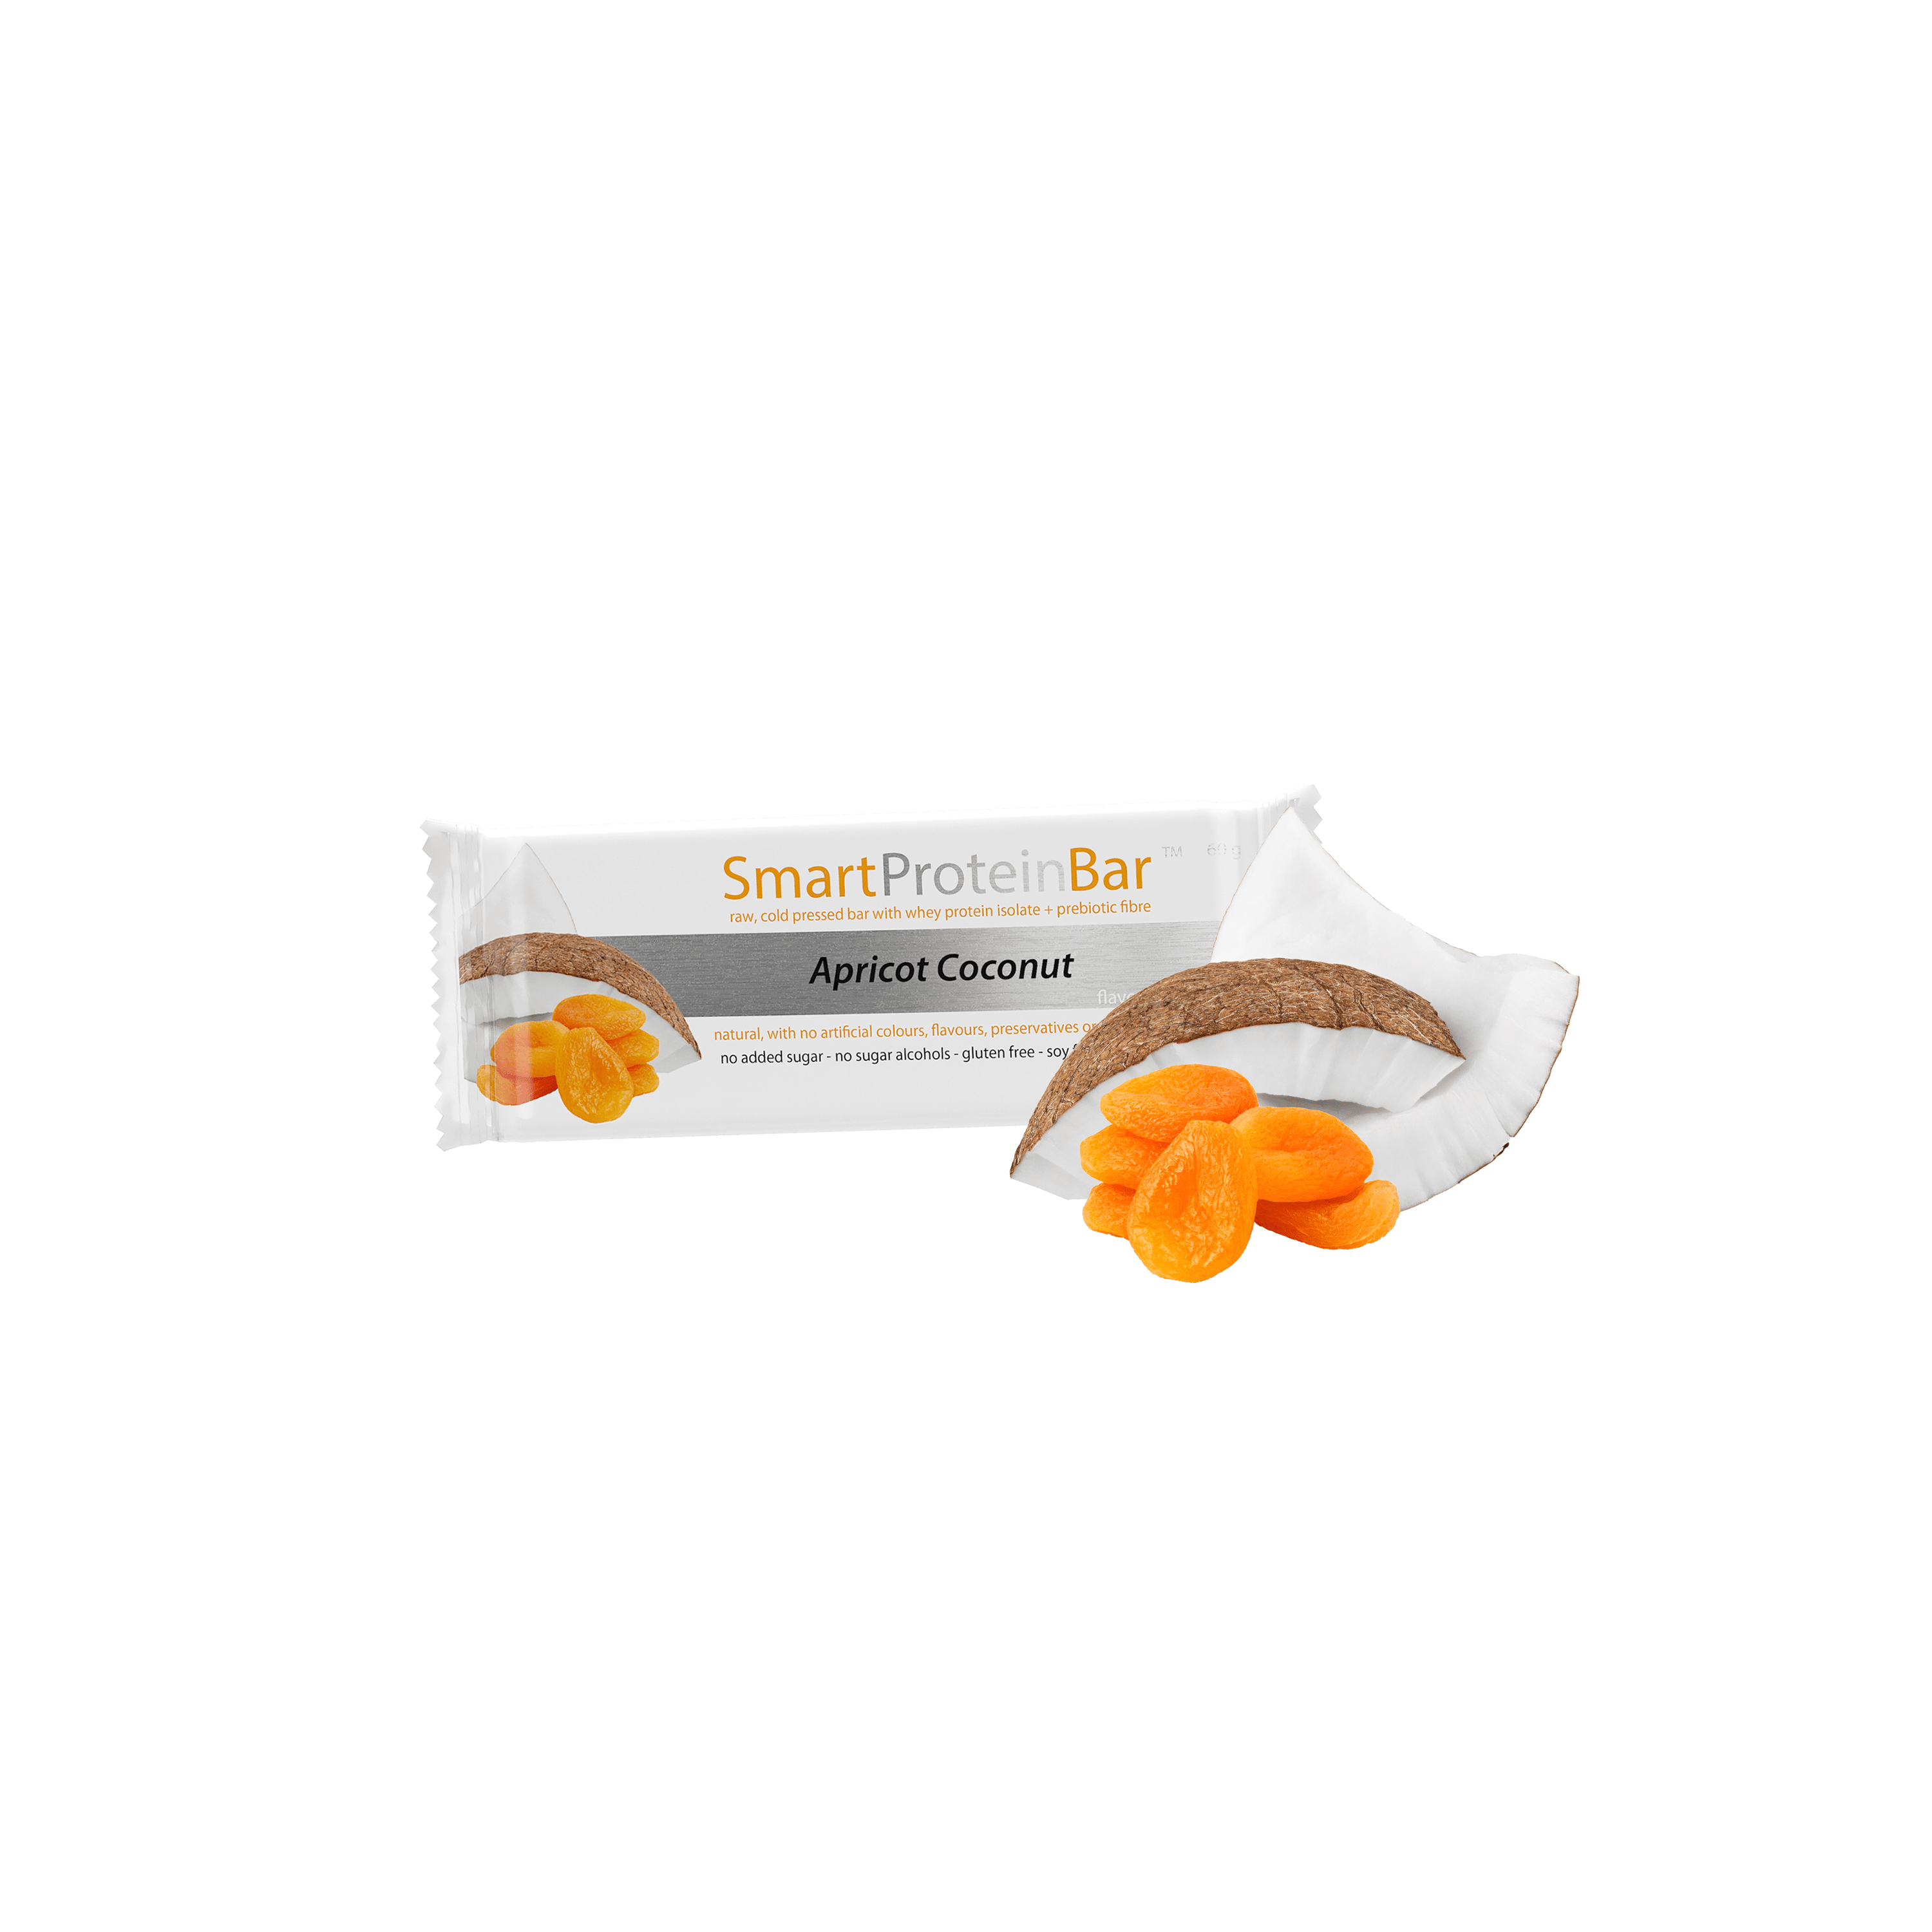 Smart Protein Bar - Apricot Coconut - Box of 12 - 720g - Ketogenic Supplies